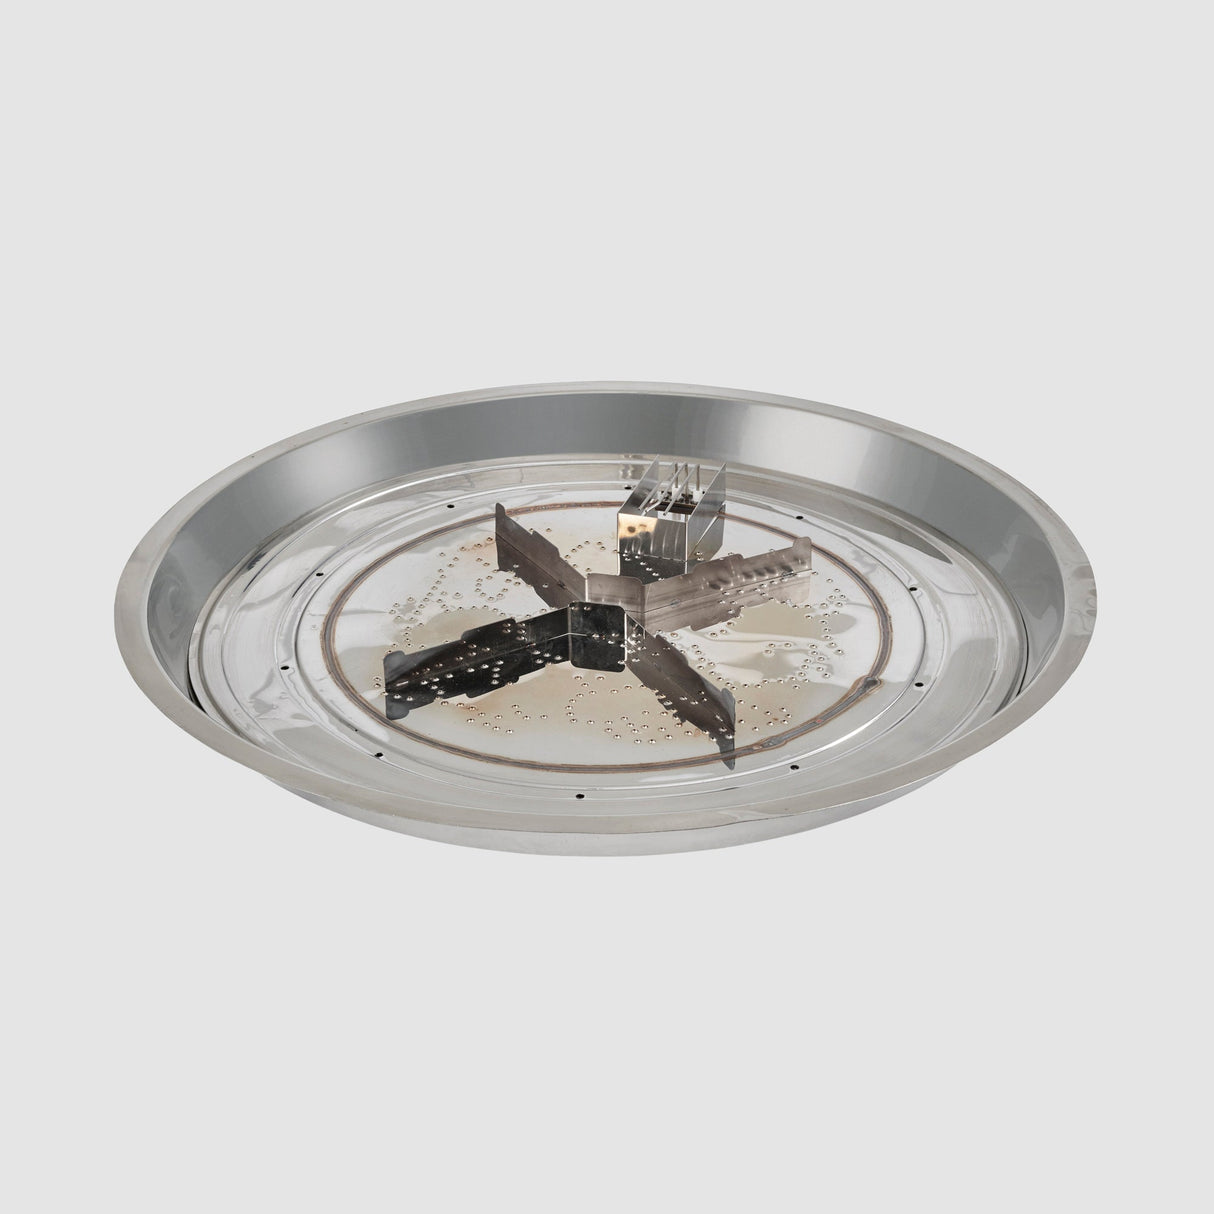 The 30" Crystal Fire Plus Round Gas Burner with Direct Spark Ignition on a grey background